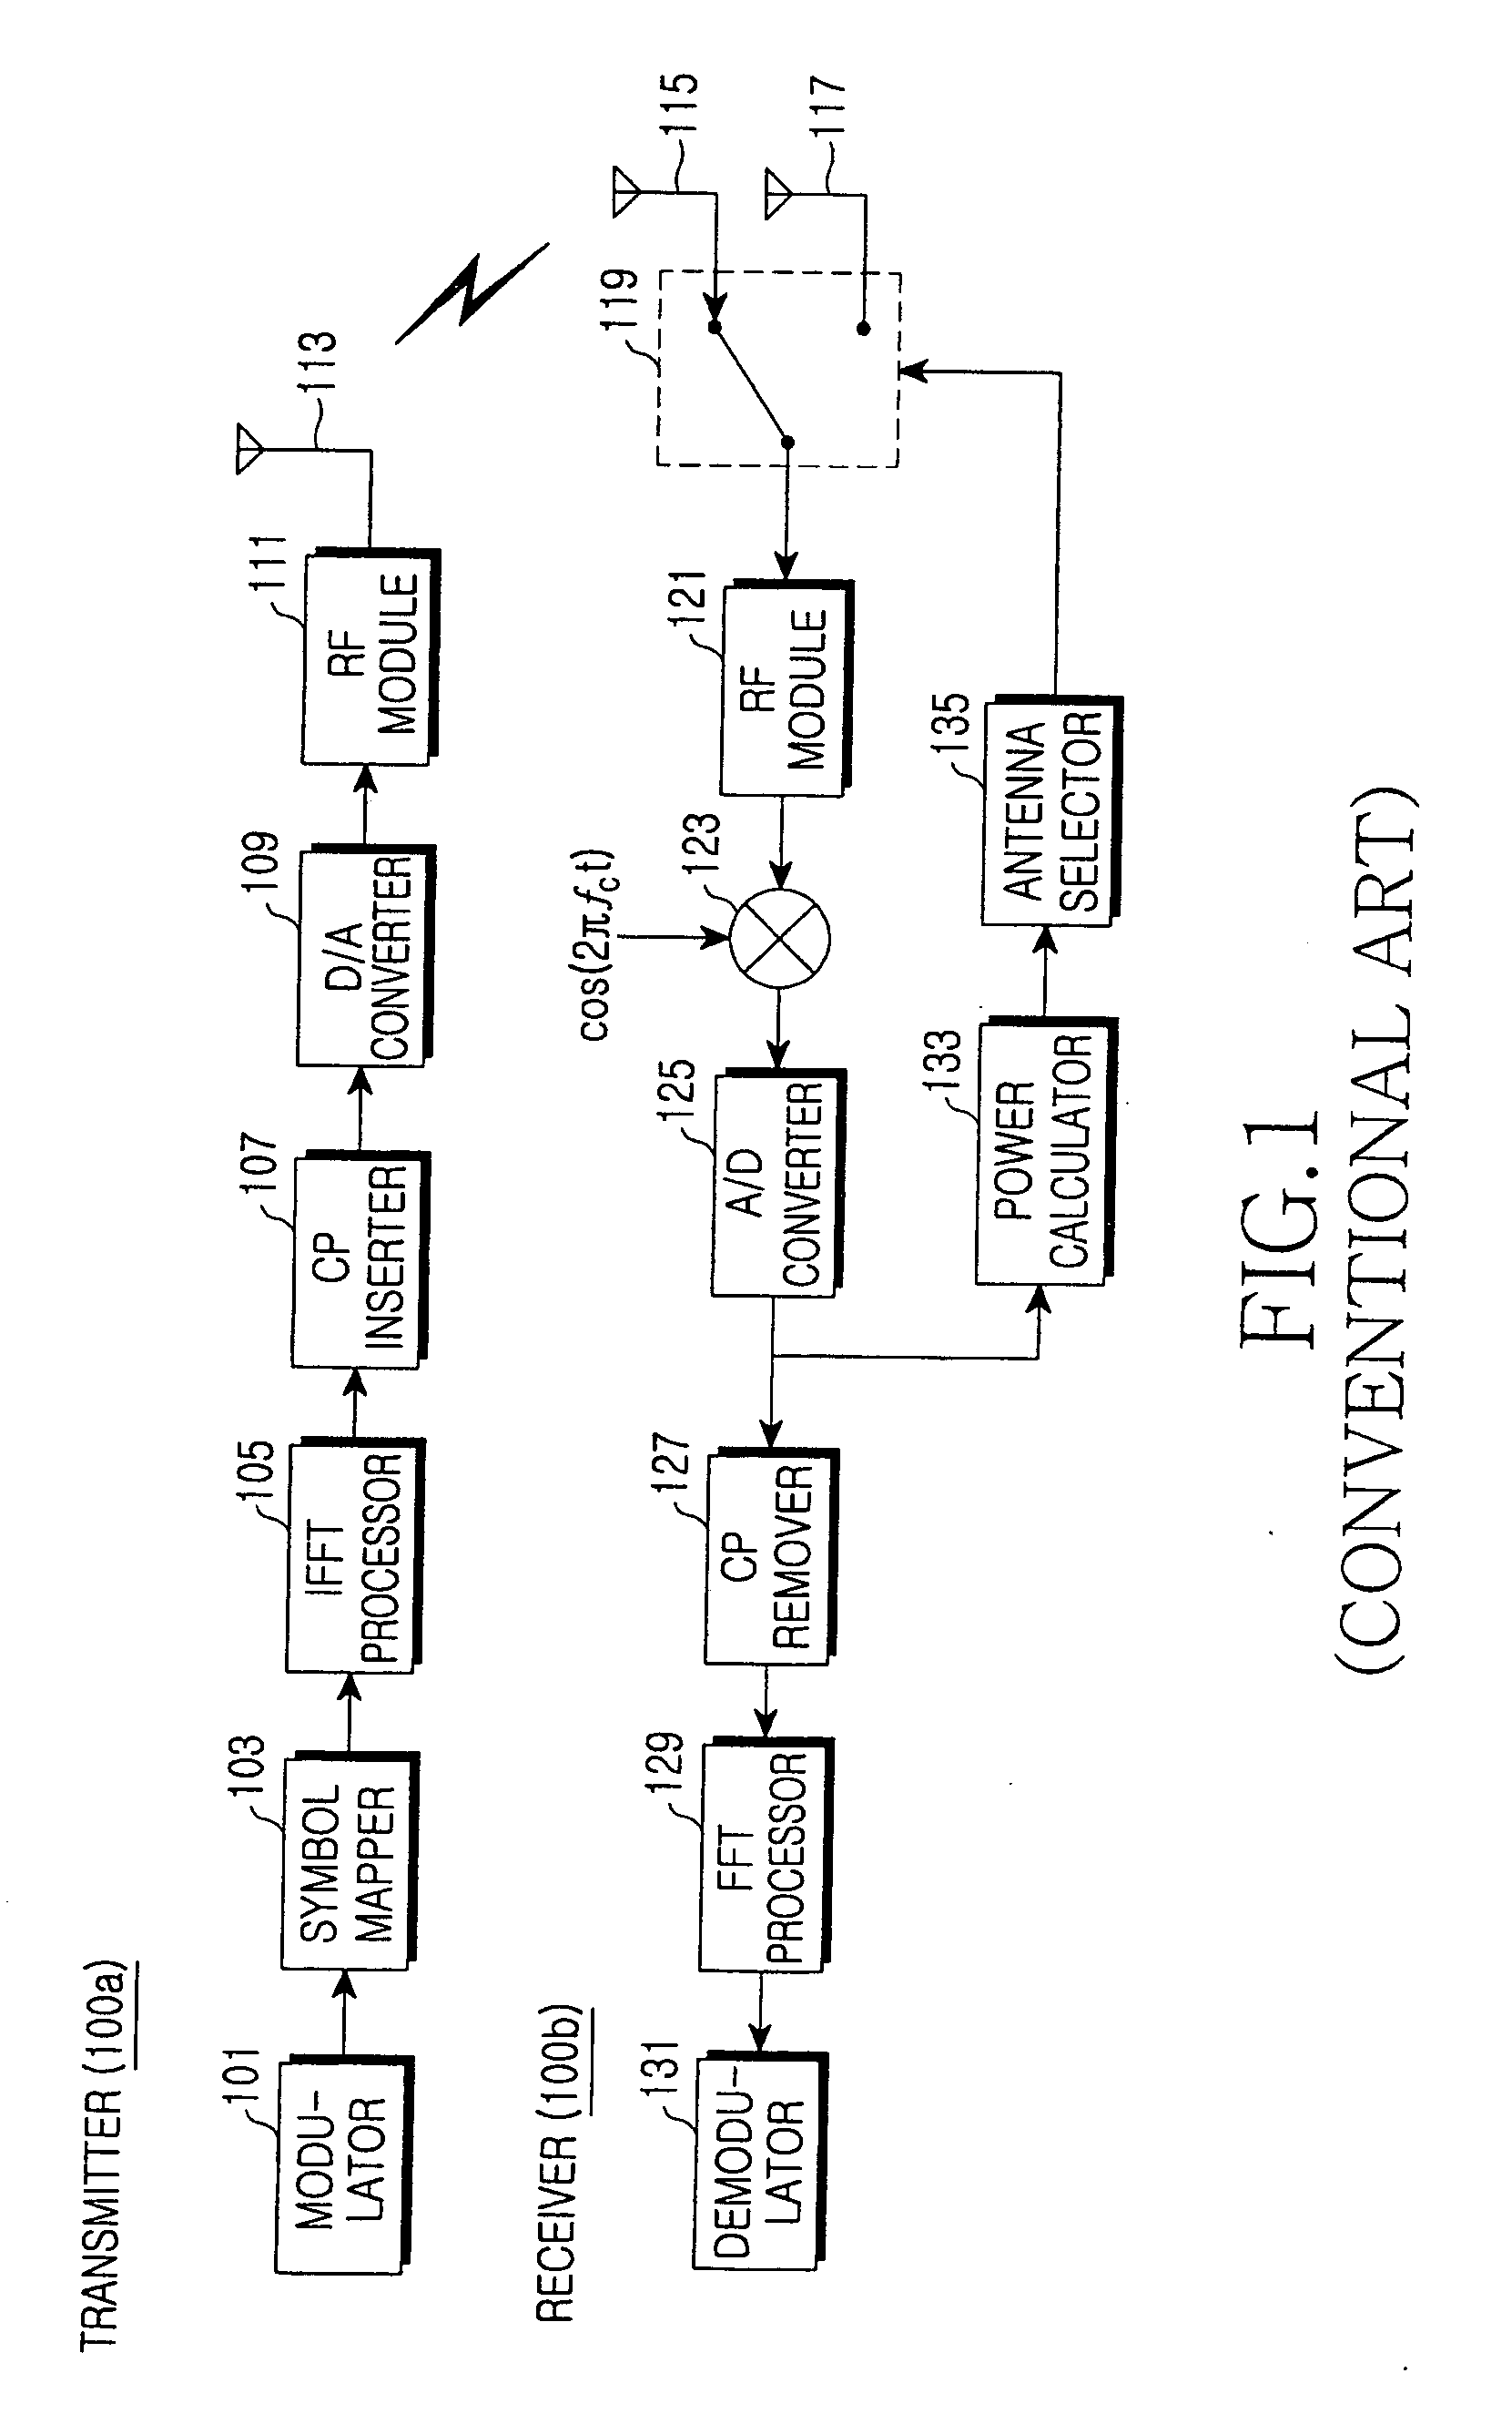 Antenna selection diversity apparatus and method in a broadband wireless communication system